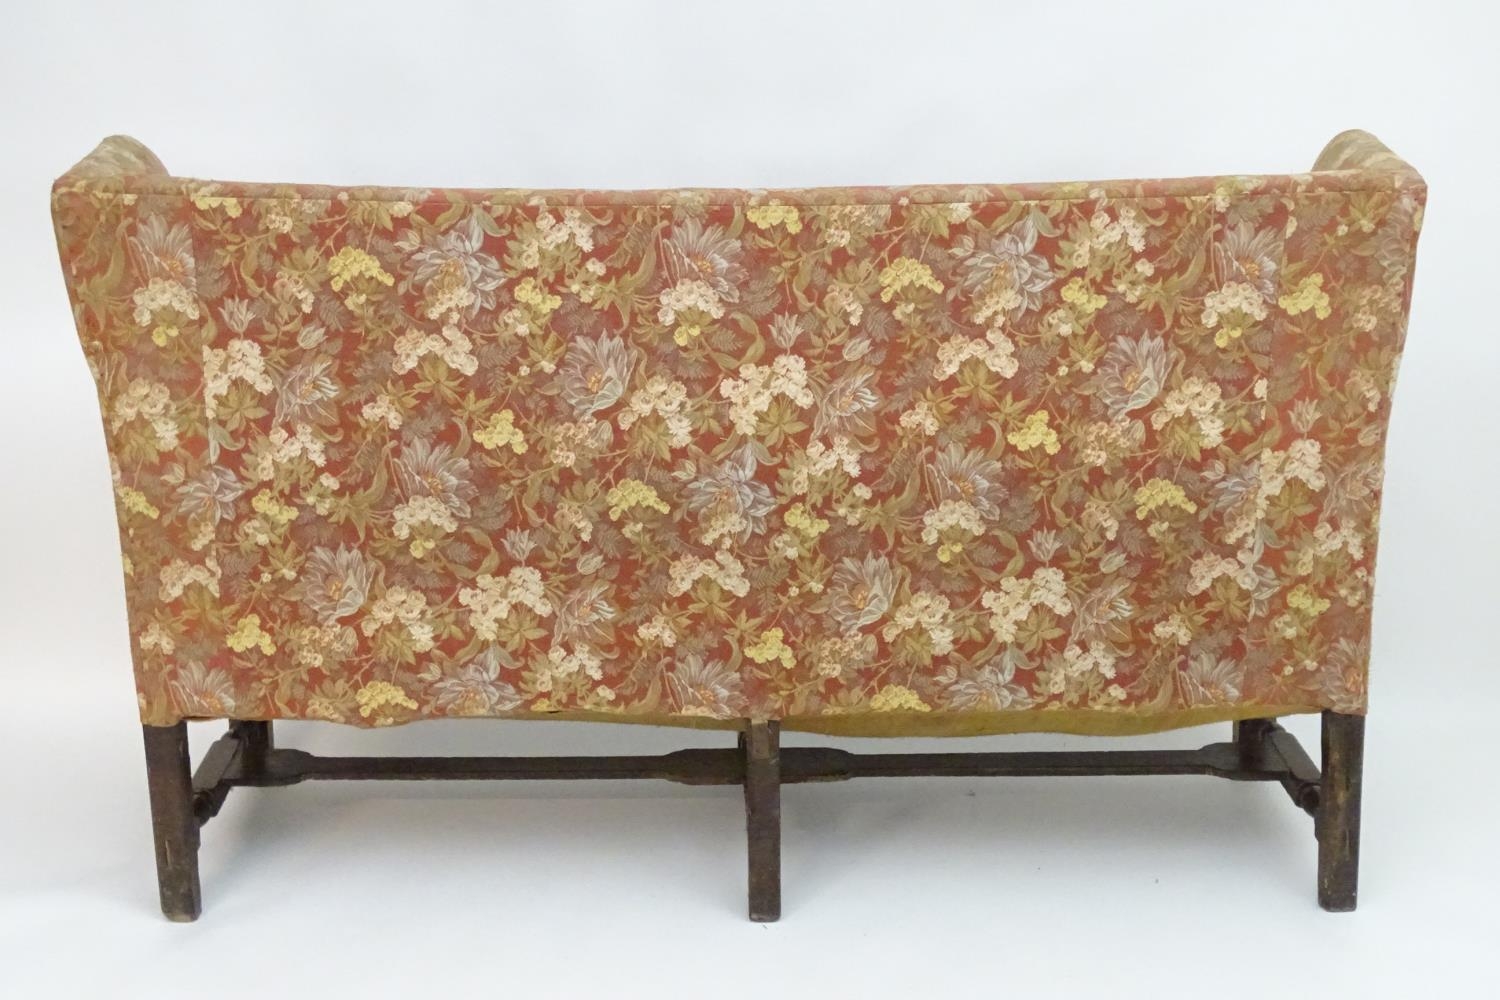 A mid 18thC wingback sofa with scrolled arms and an upholstered backrest and seat above a - Image 11 of 12